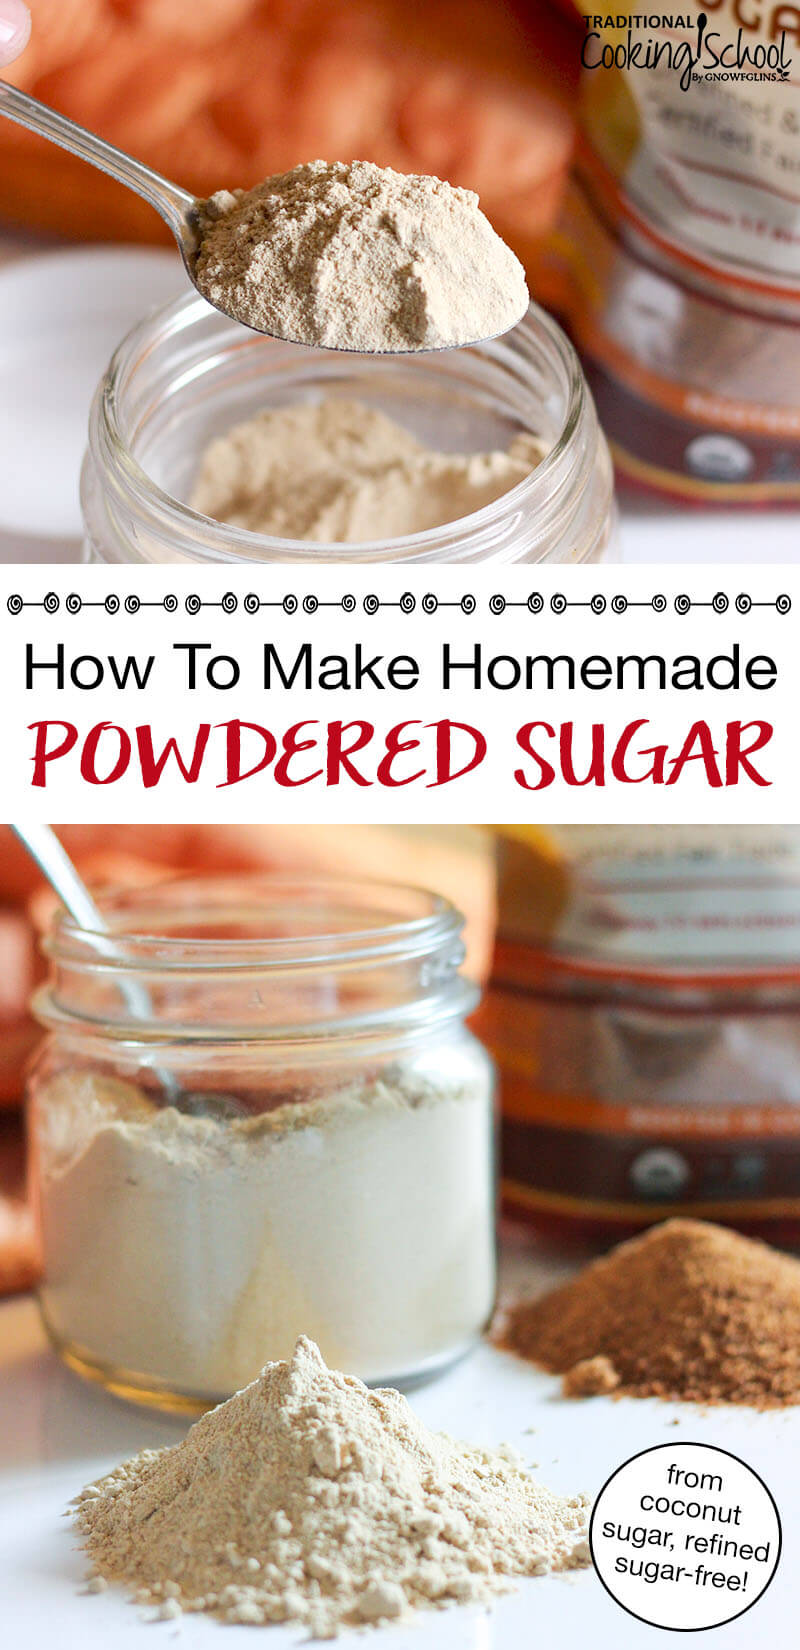 photo collage of powdered sugar as compared to a pile of coarse coconut sugar in the background, with text overlay: "How To Make Homemade Powdered Sugar (from coconut sugar, refined sugar-free!)"